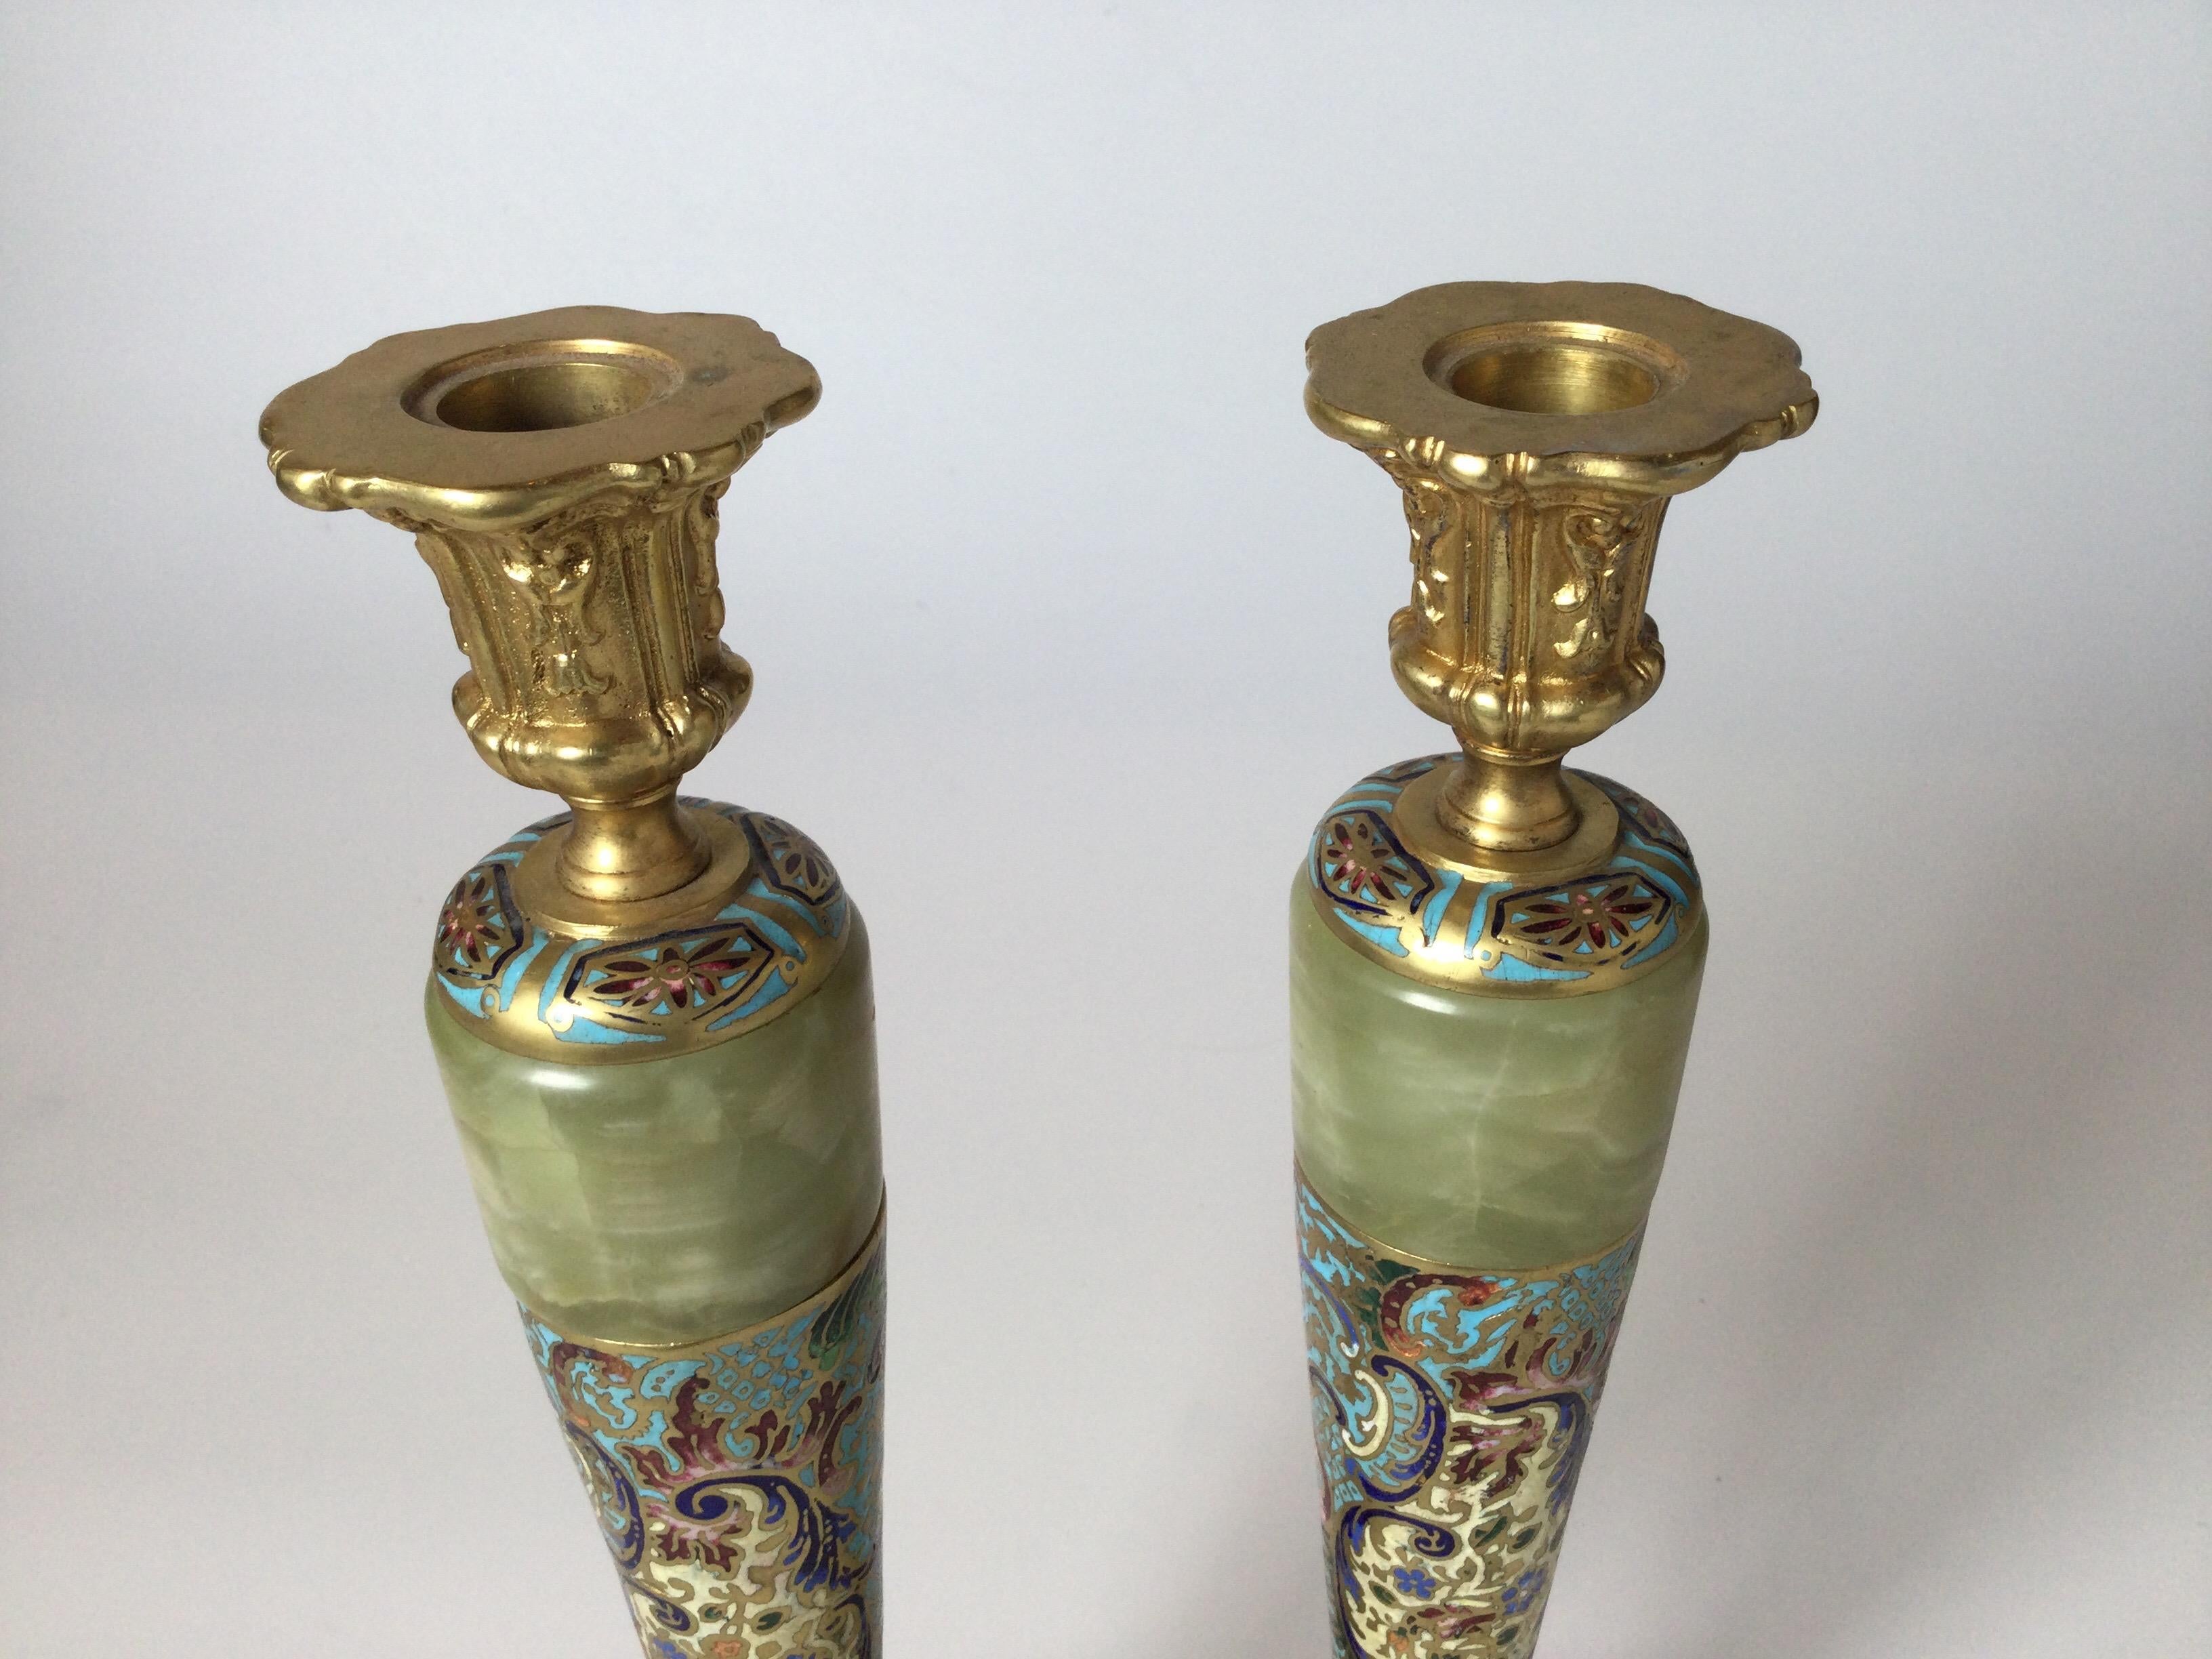 French Circa 1900 Gilt Bronze Champleve' and Onyx Tall Candlesticks